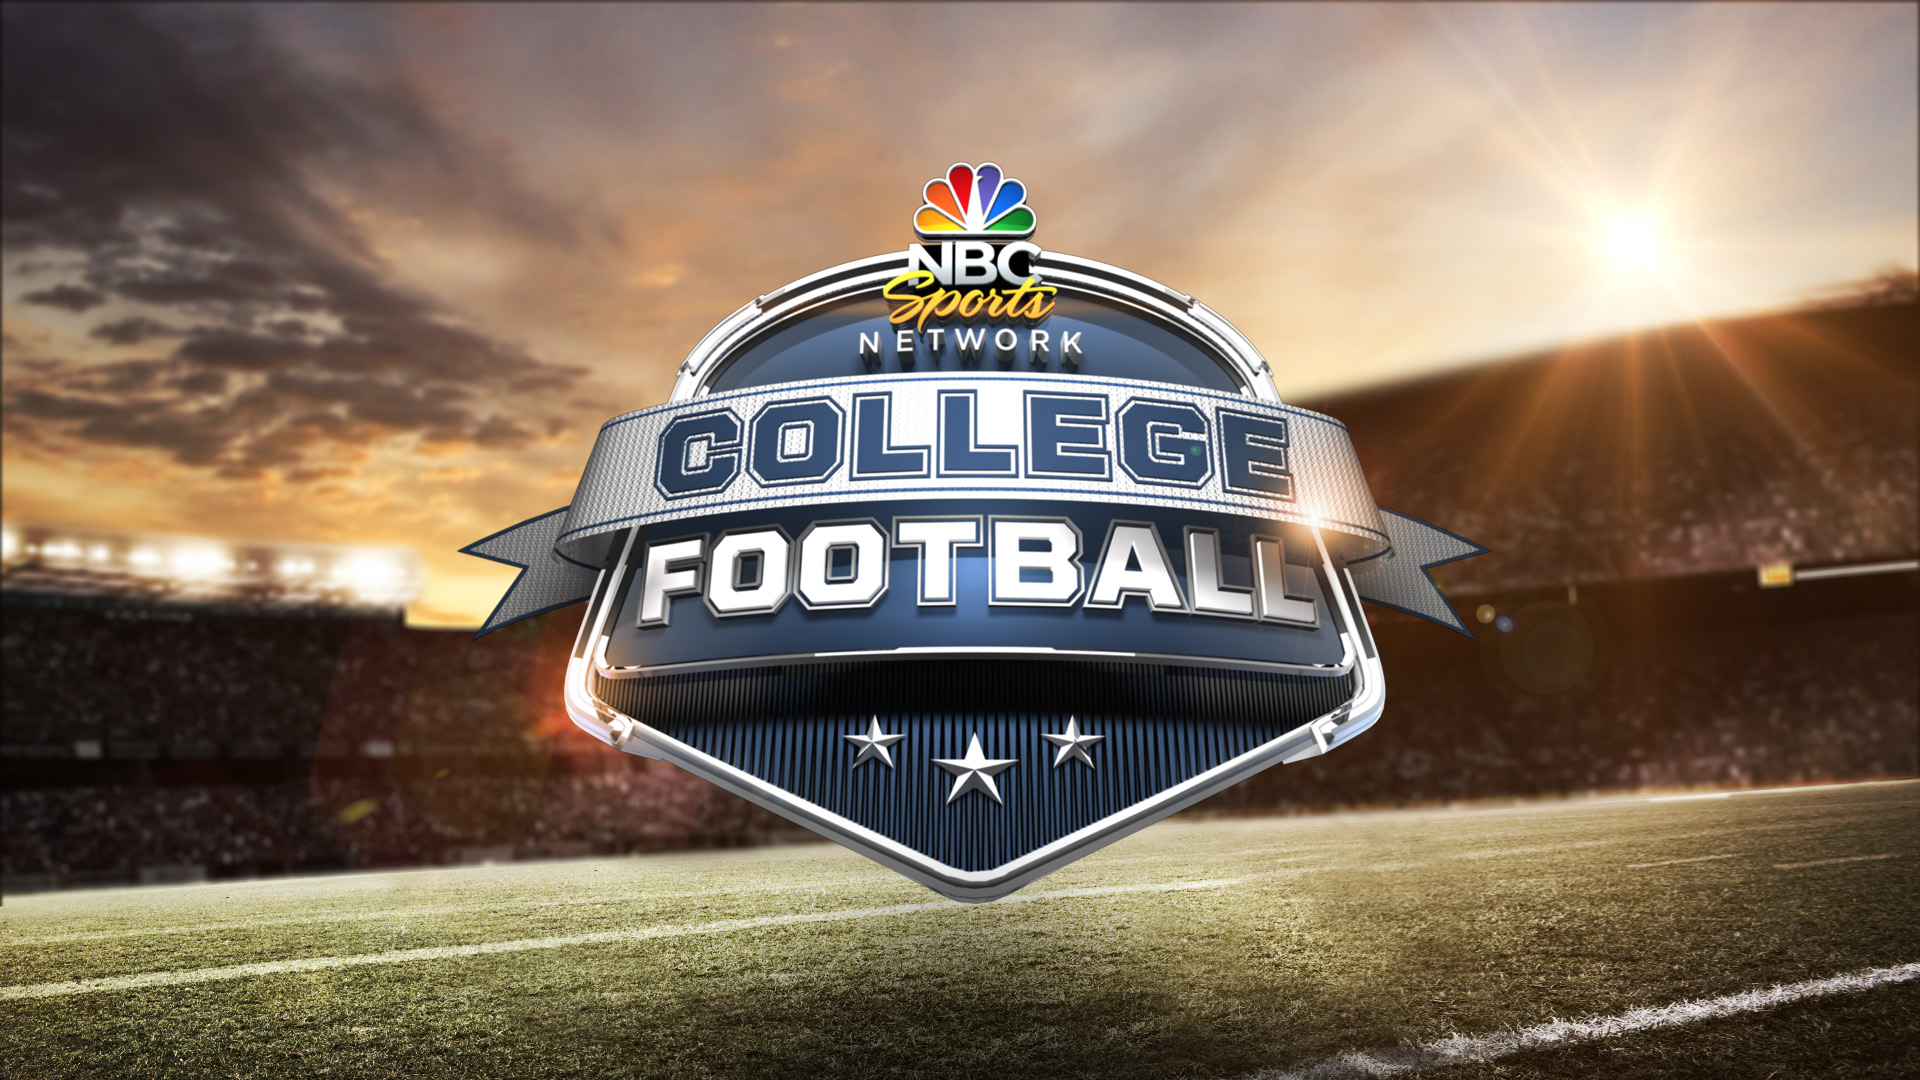 NBC SPORTS NETWORK "COLLEGE FOOTBALL" IMPOSSIBLE PICTURESIMPOSSIBLE